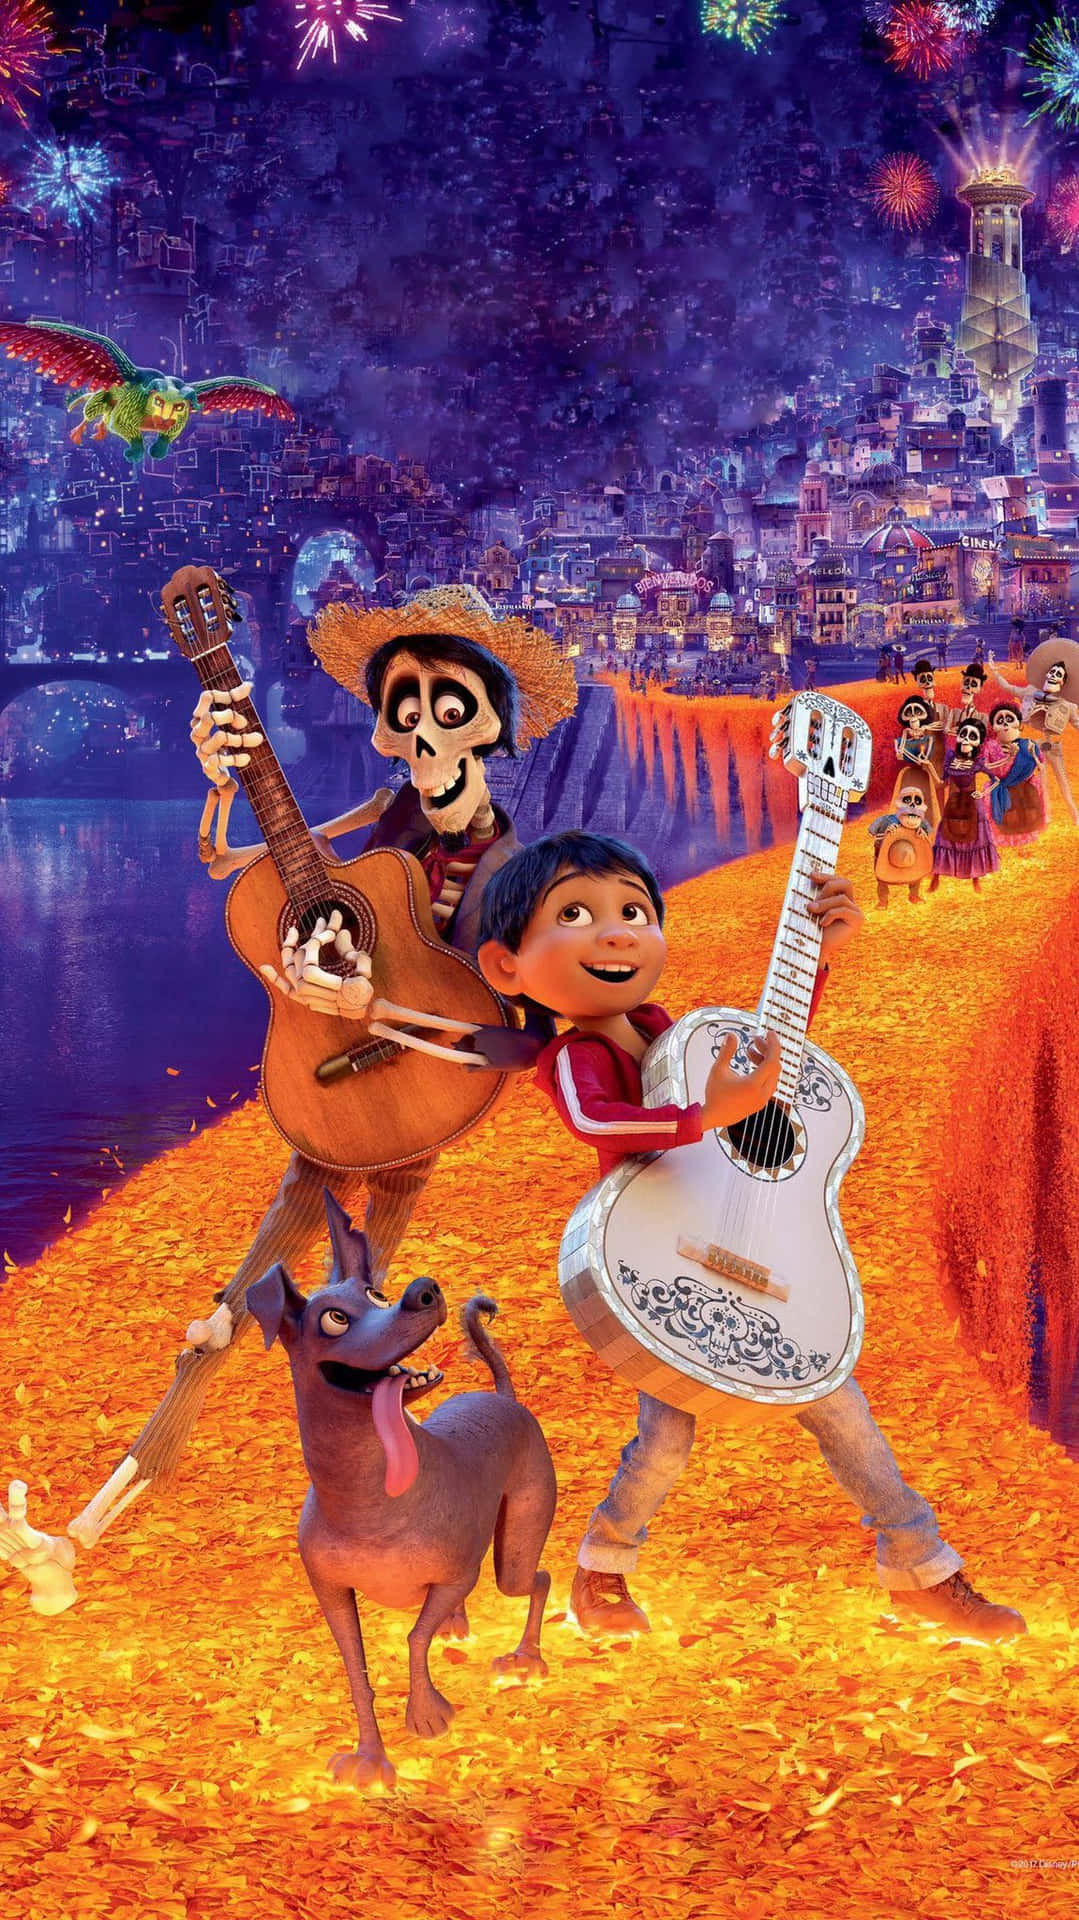 Join Miguel on a magical journey in the Land of the Dead with Disney's COCO! Wallpaper